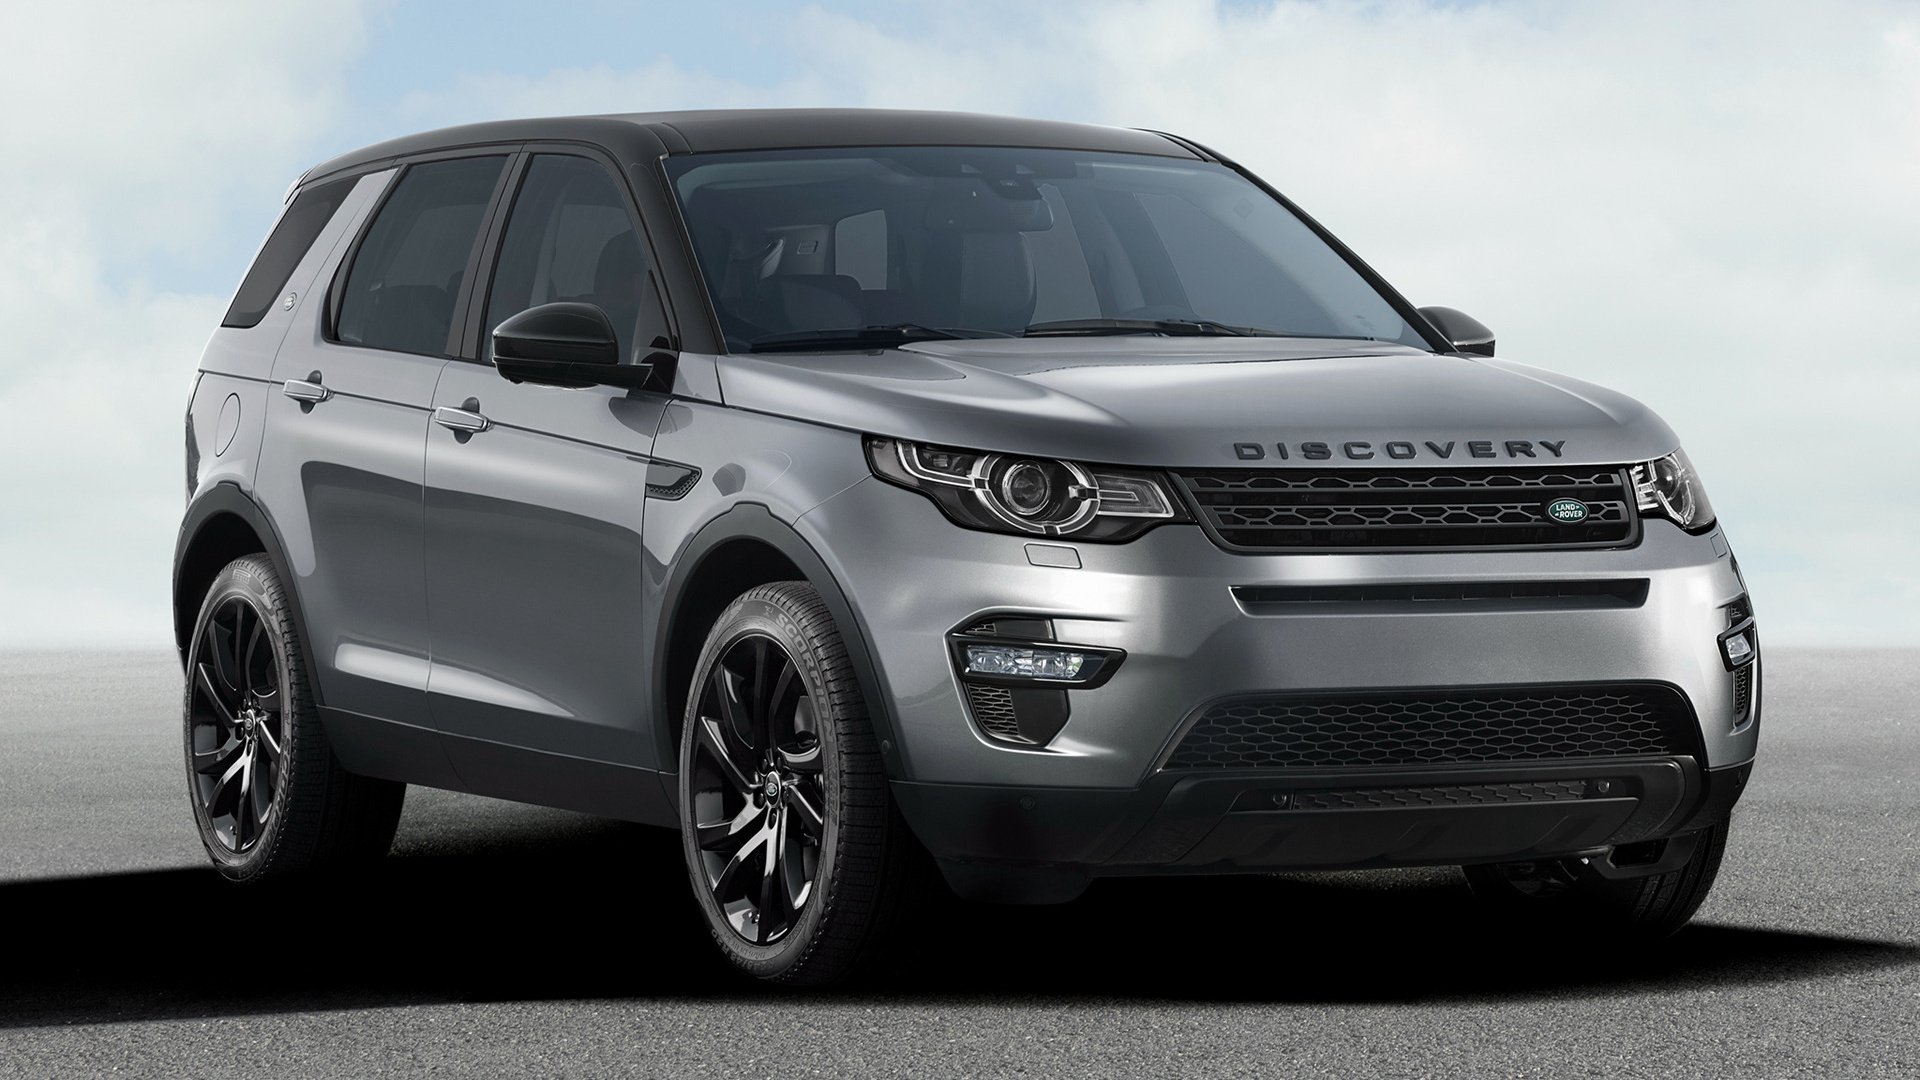 Land Rover Car Wallpapers Hd